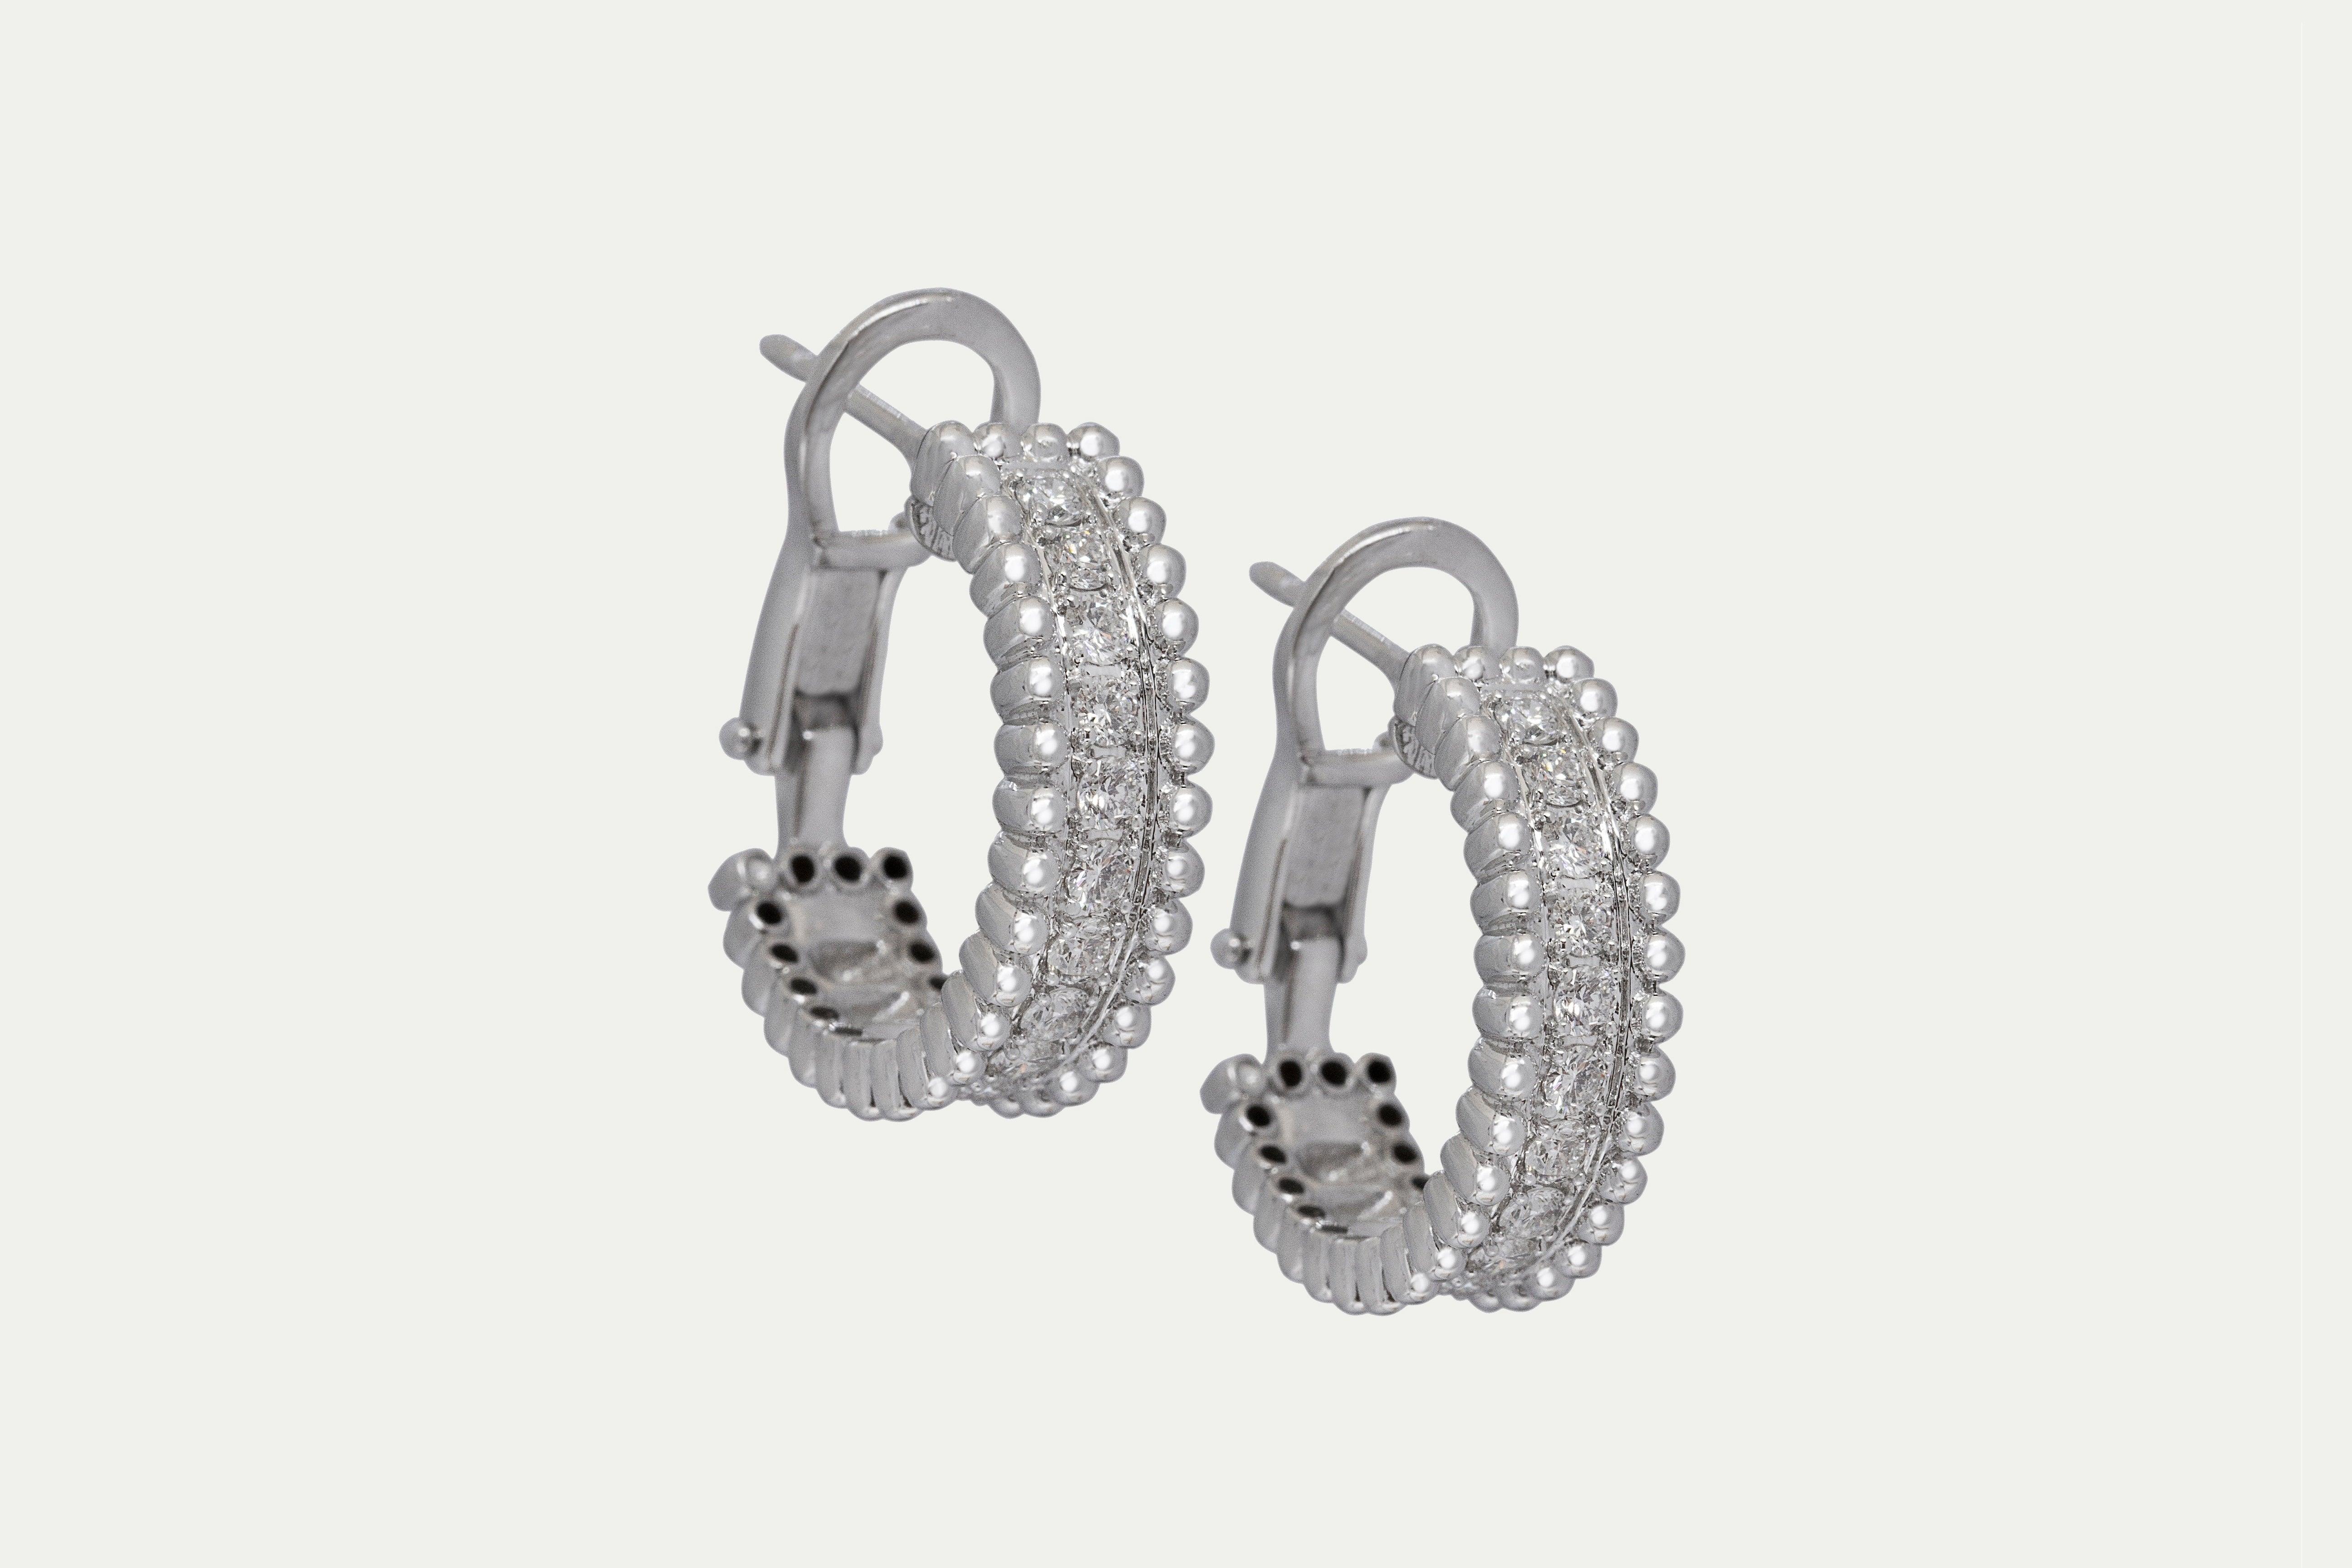 Earrings 18k white gold with 24 round diamonds, Carat total weight 0.74